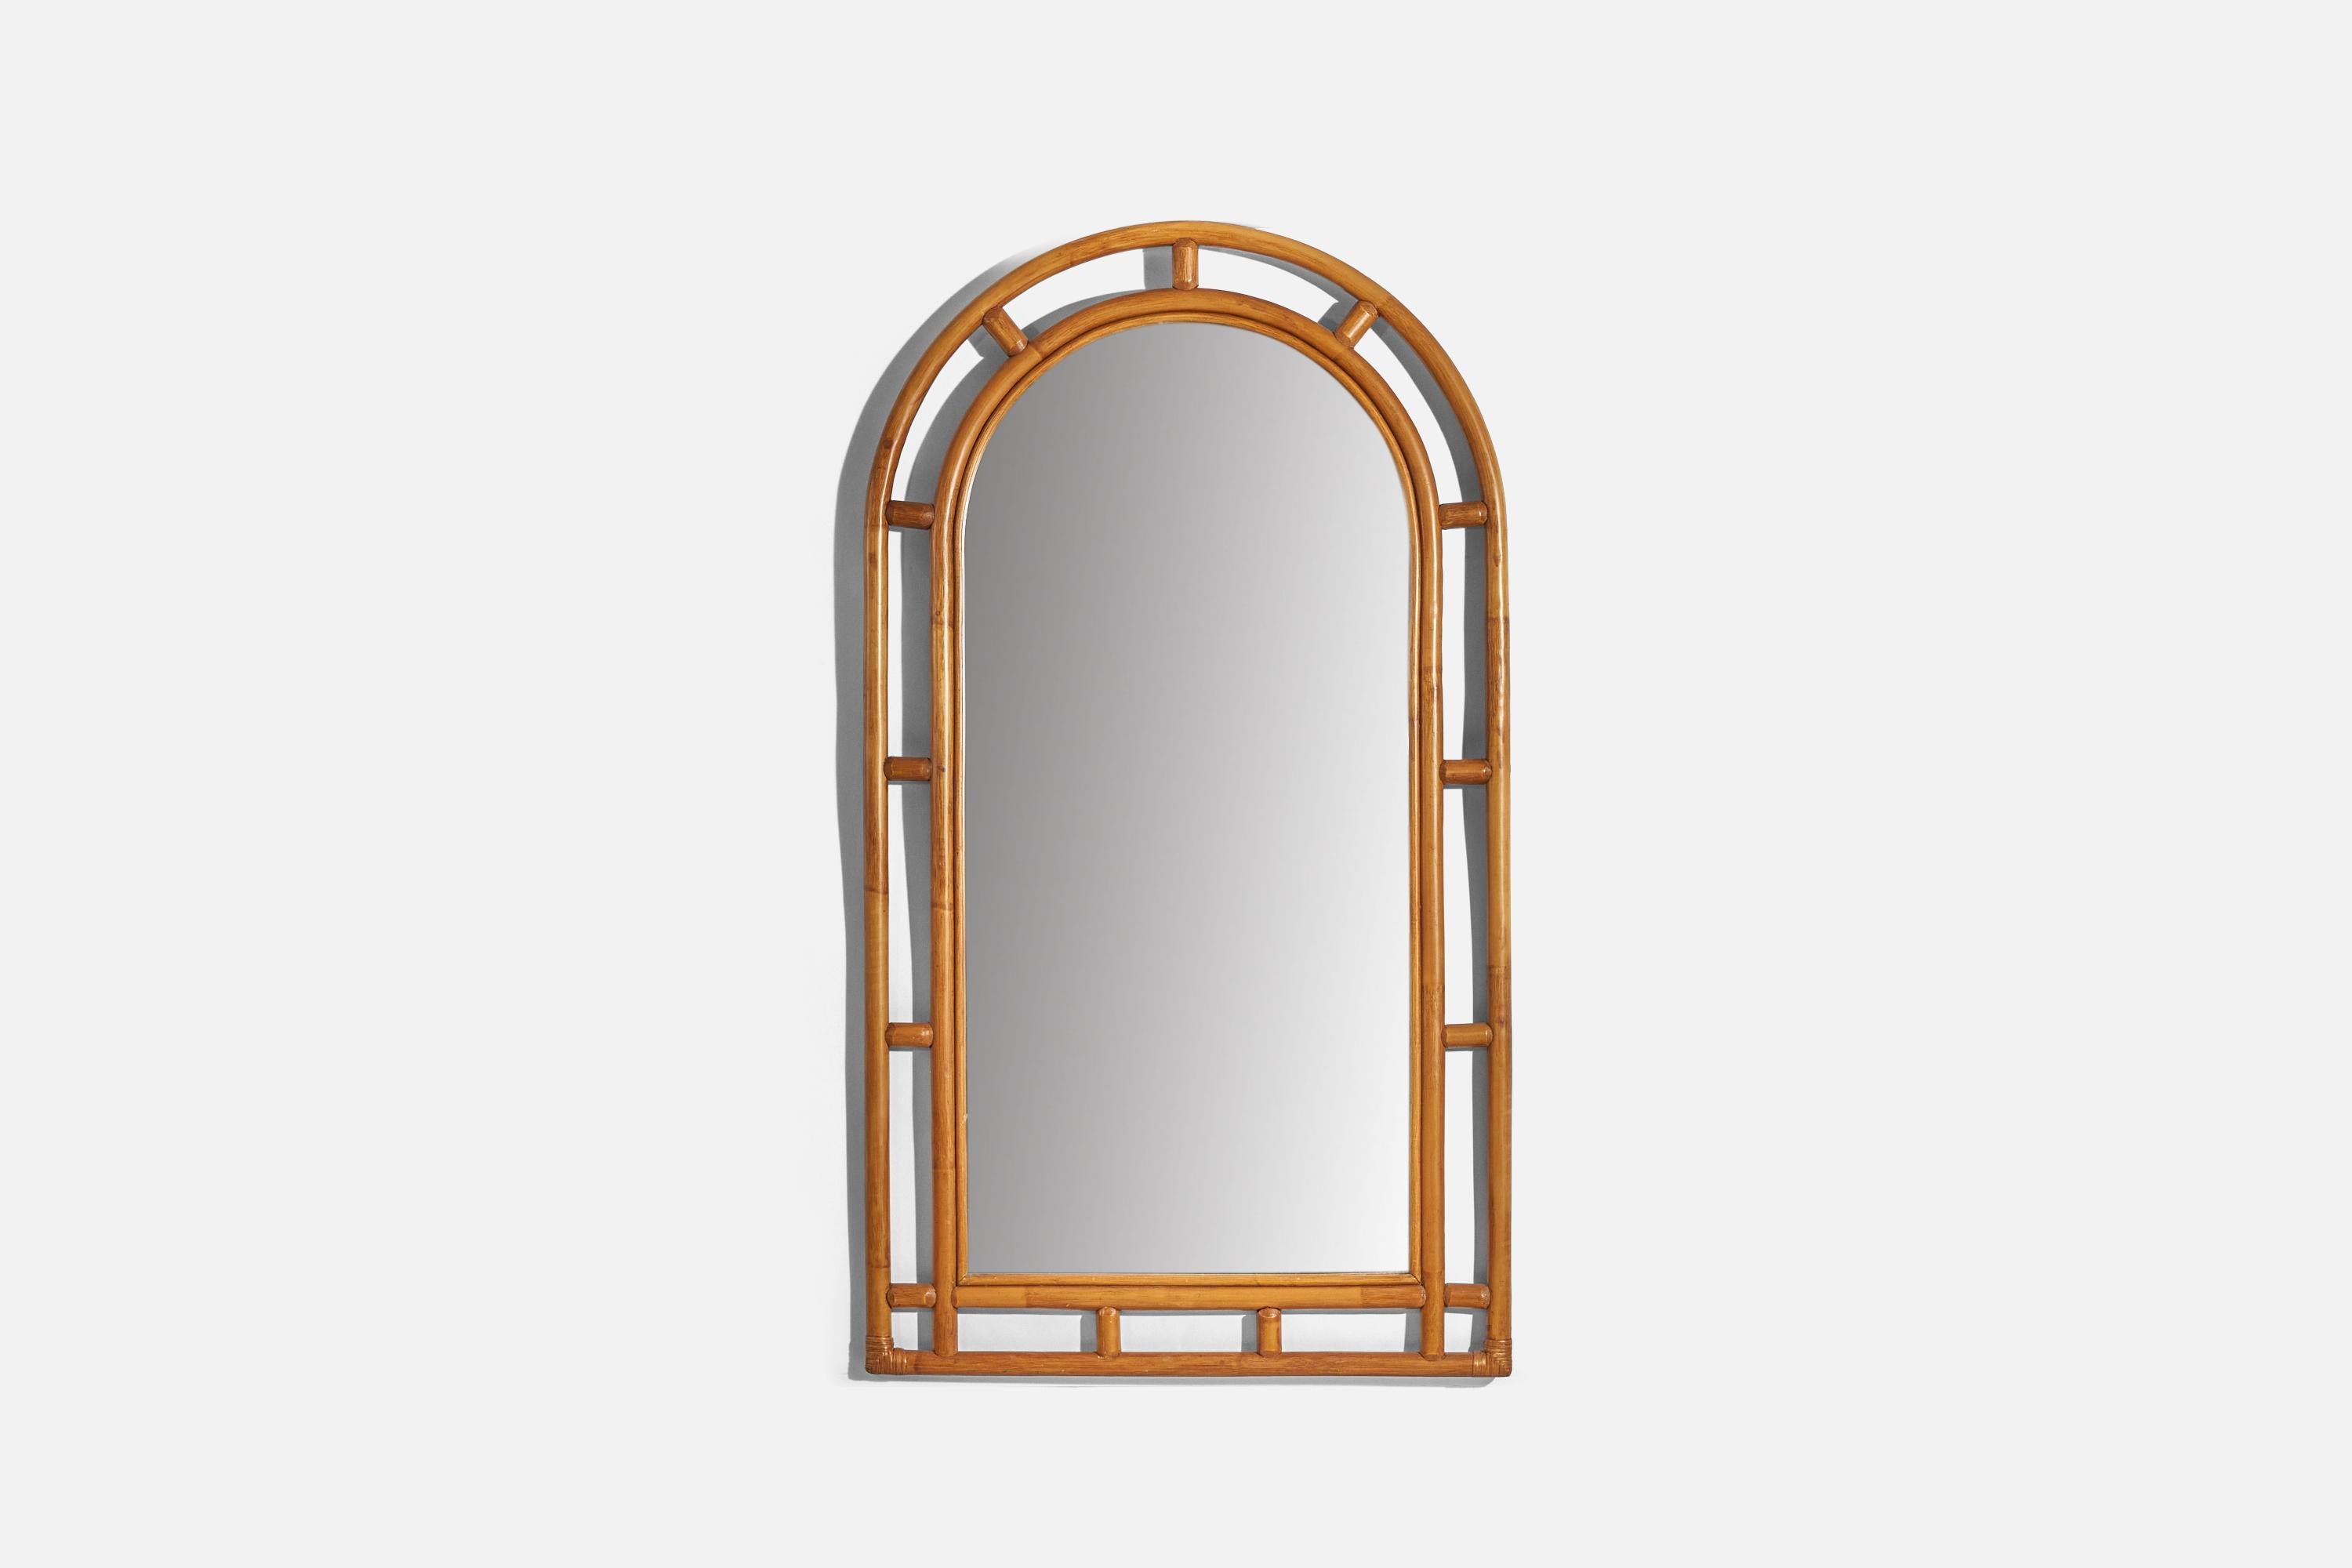 A bamboo wall mirror designed and produced in Italy, 1950s.
   